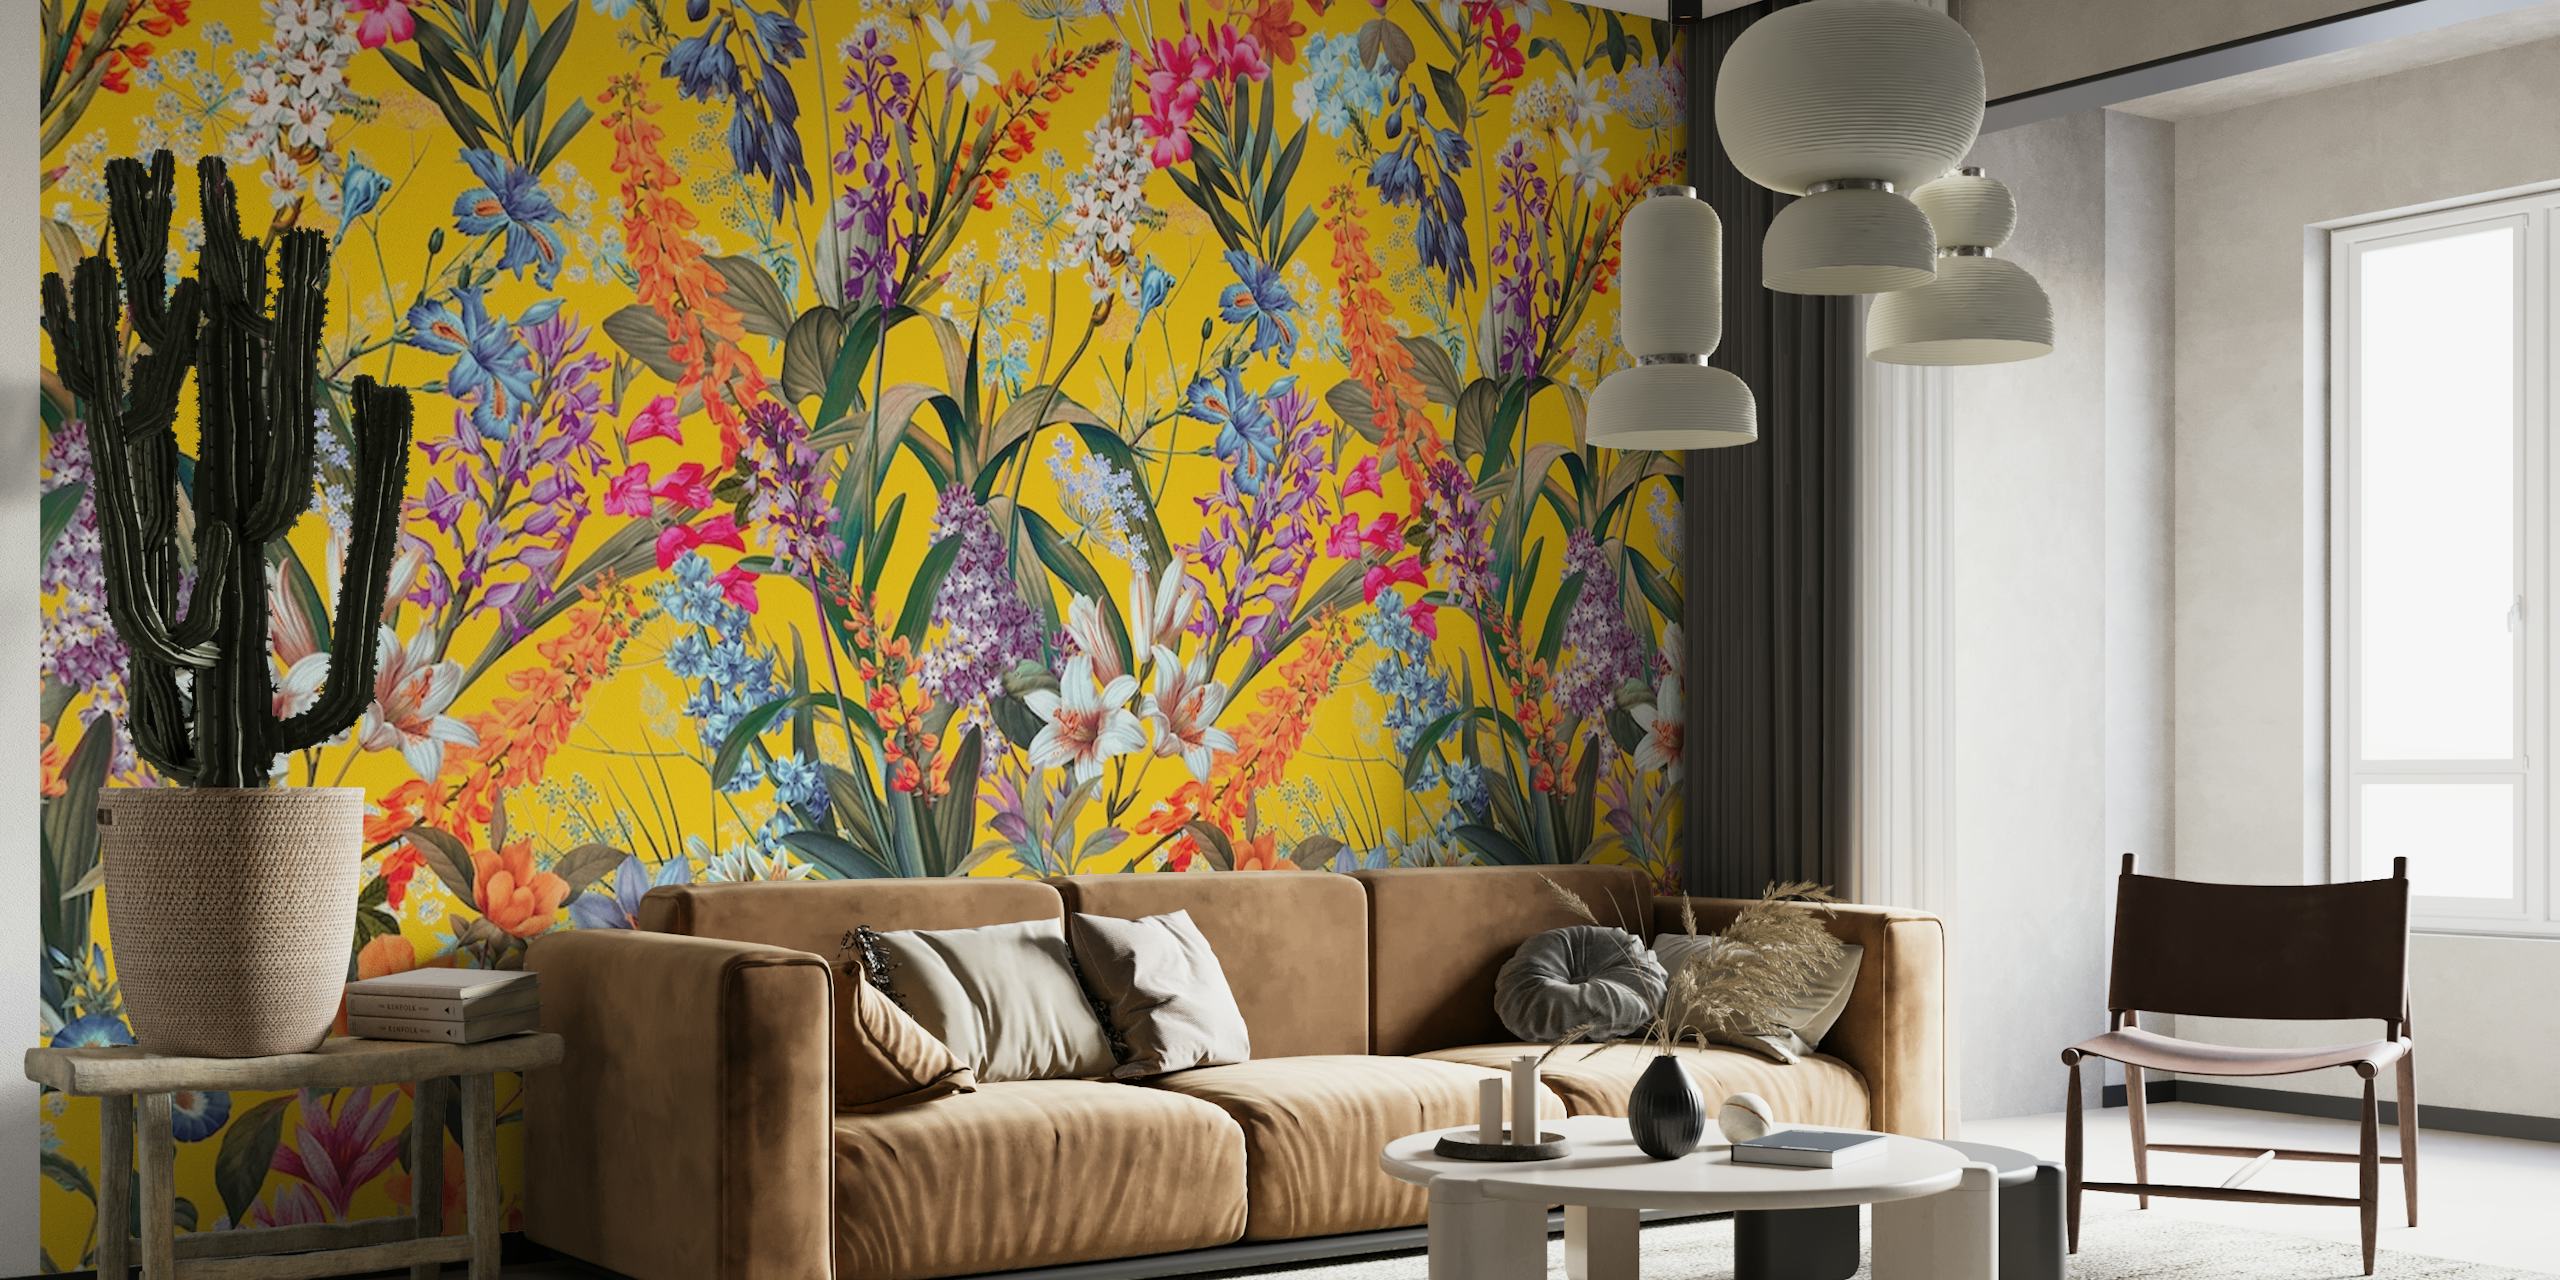 Colorful summer floral wall mural on a yellow background